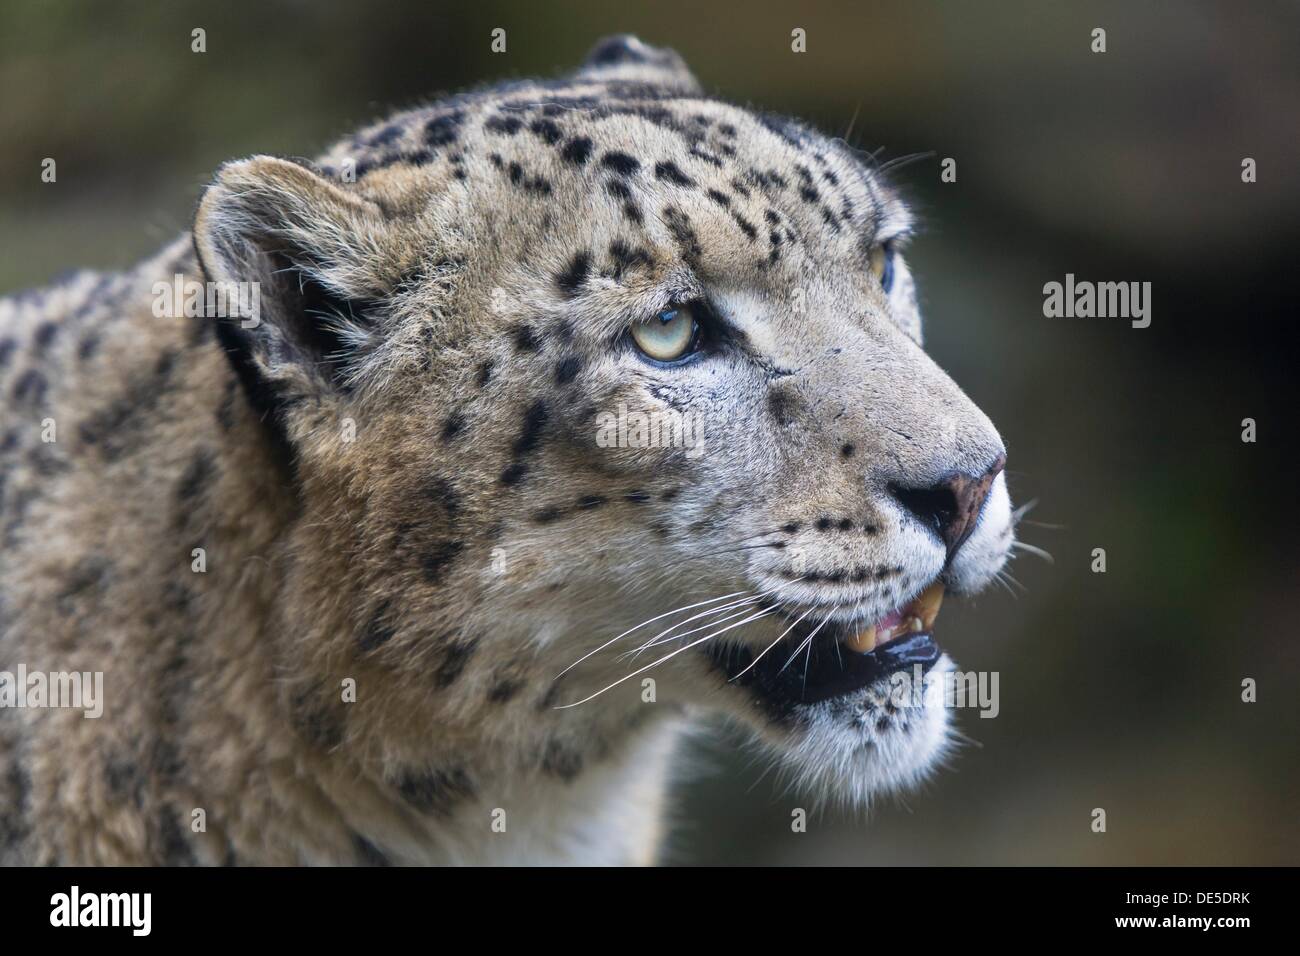 A portrait of an adult snow leopard (Panthera unica) Stock Photo